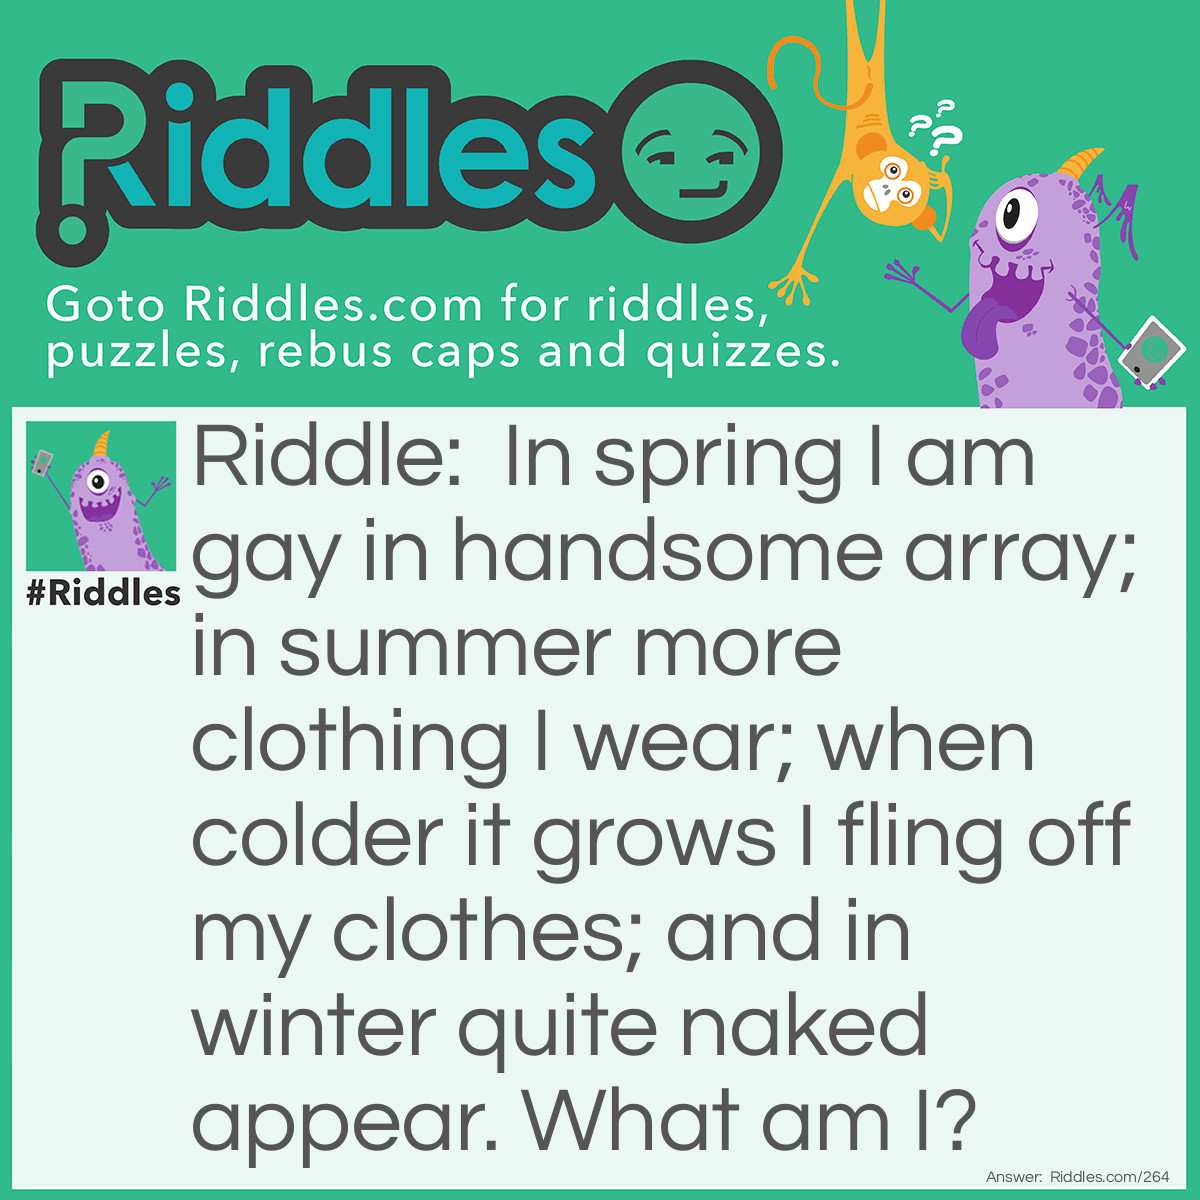 Riddle: In spring I am gay in handsome array; in summer more clothing I wear; when colder it grows I fling off my clothes; and in winter quite naked appear. What am I? Answer: A Tree.